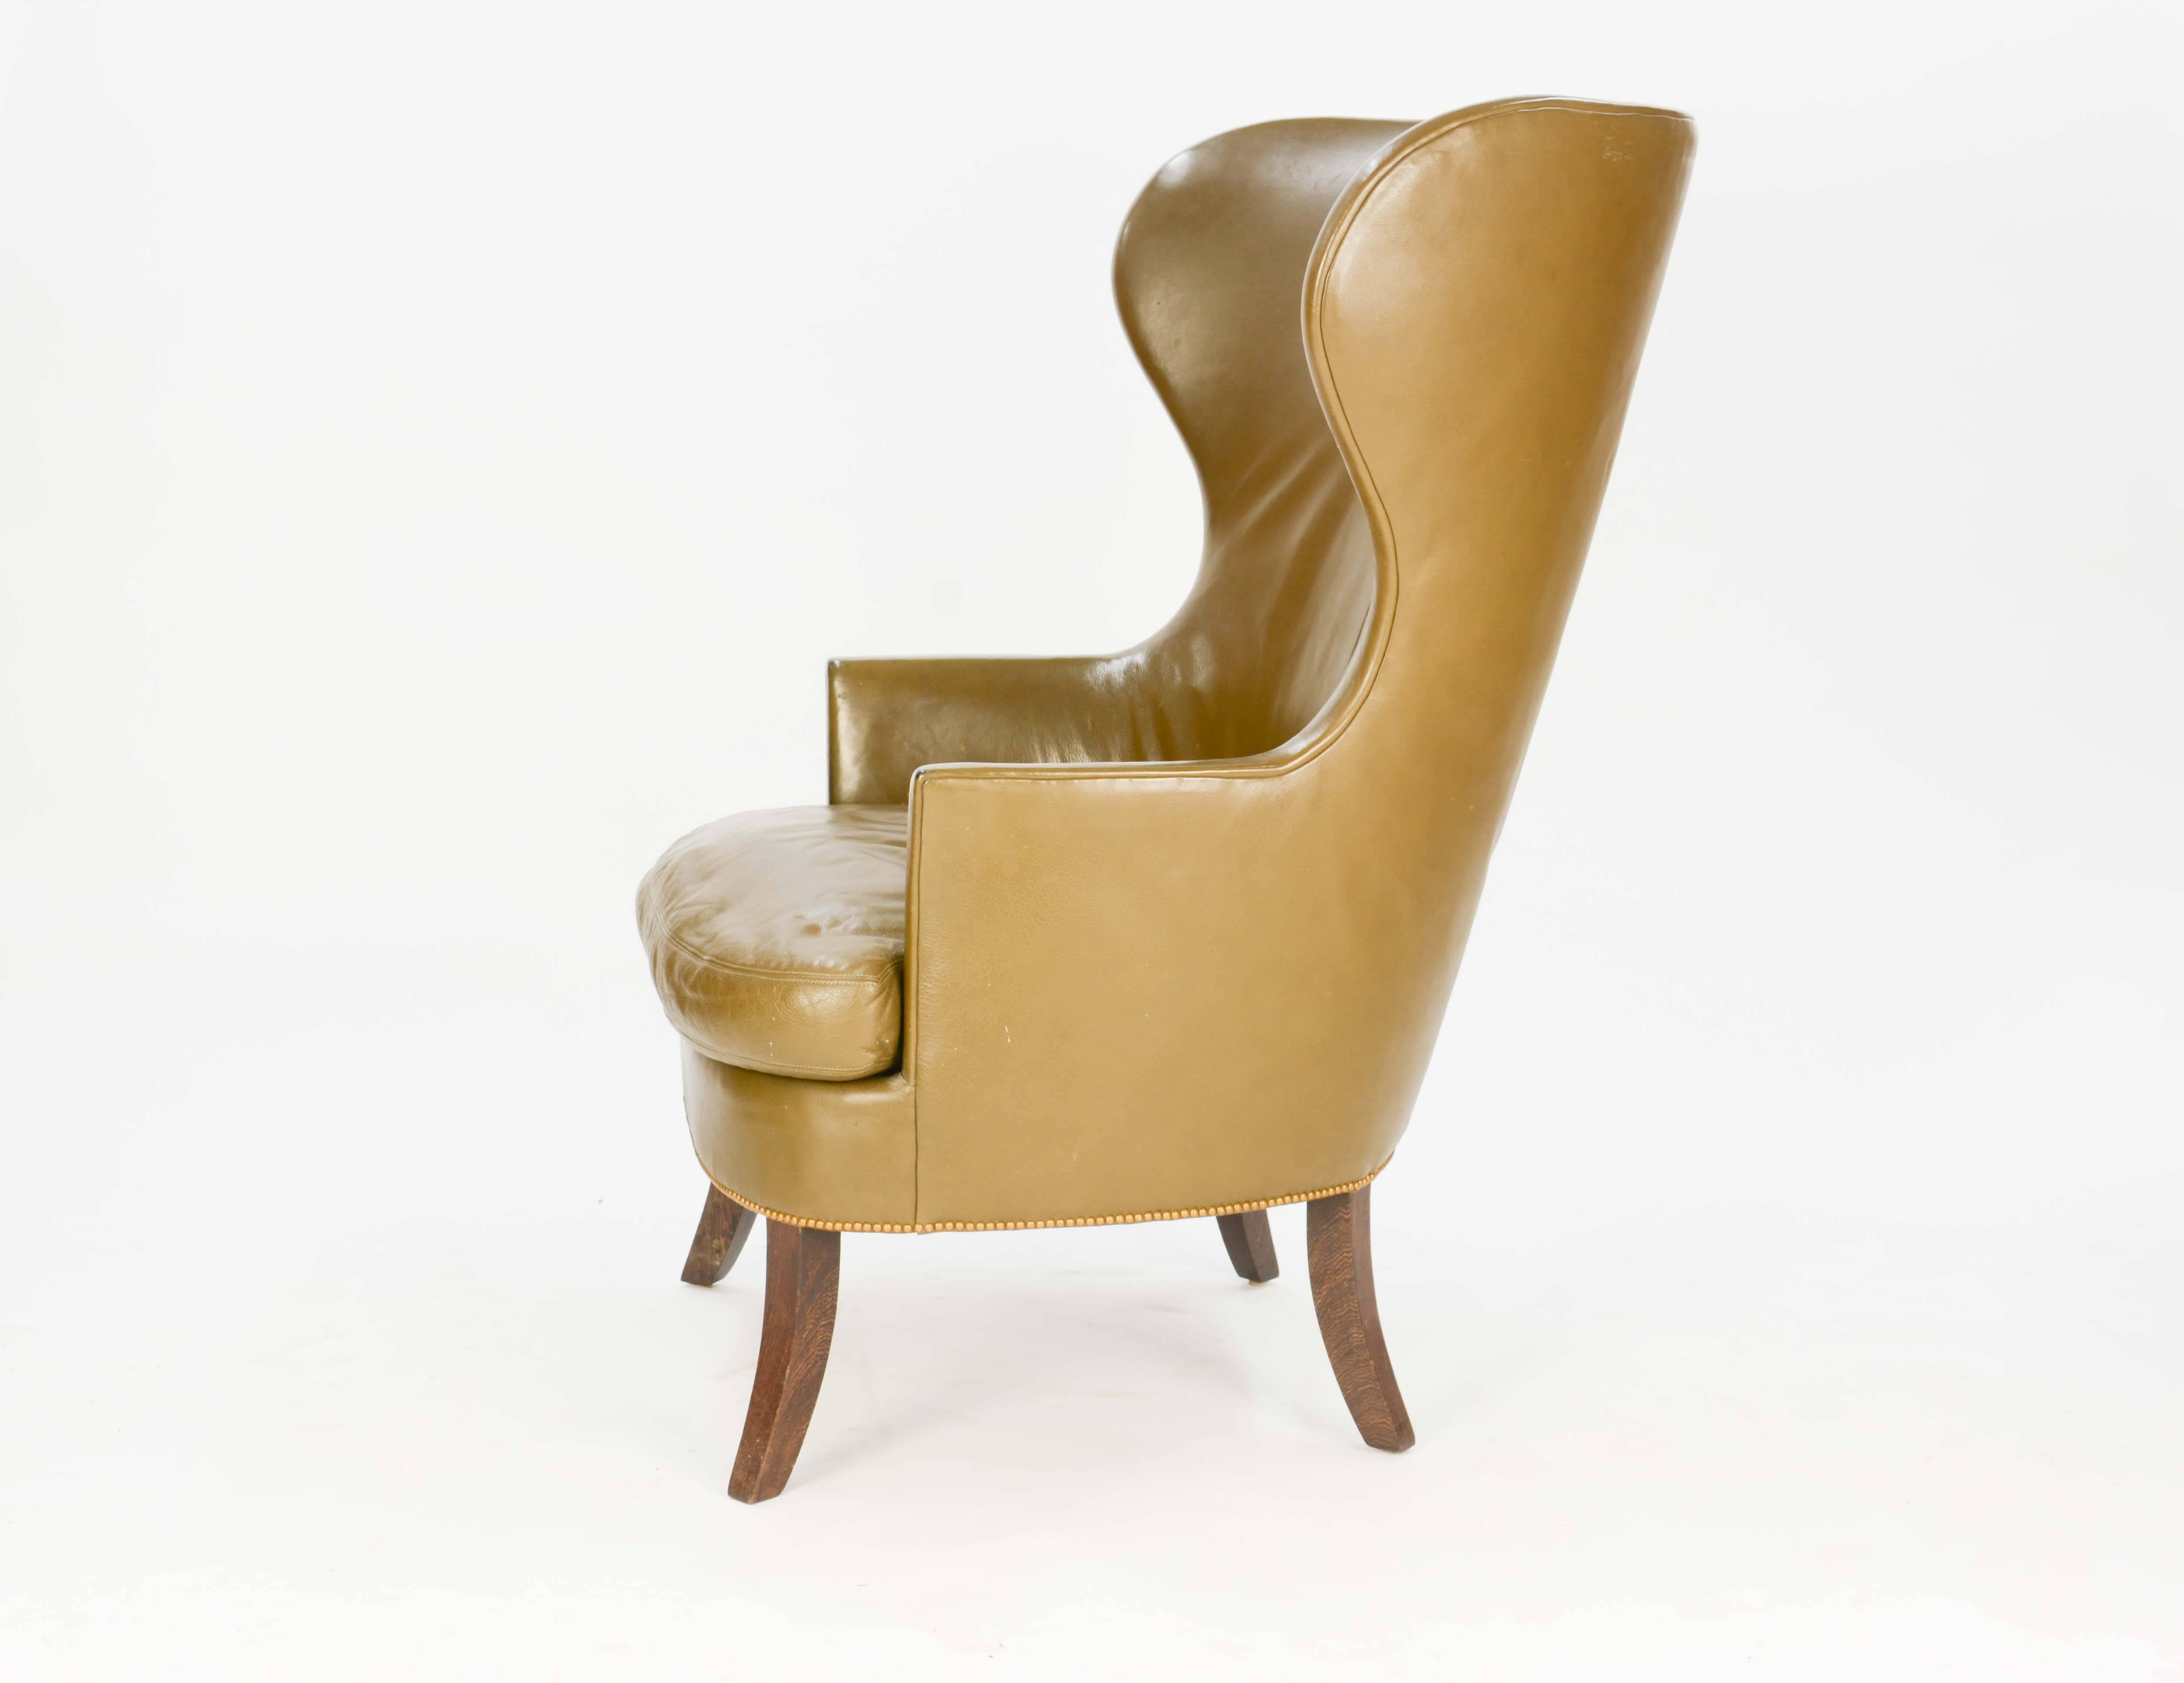 These are our made-to-order wingback club chairs. They are a Danish design, and we can cover them in fabric or leather. The legs, also, can be ebonized or produced in dark walnut. List price does not include upholstery fabric or leather.